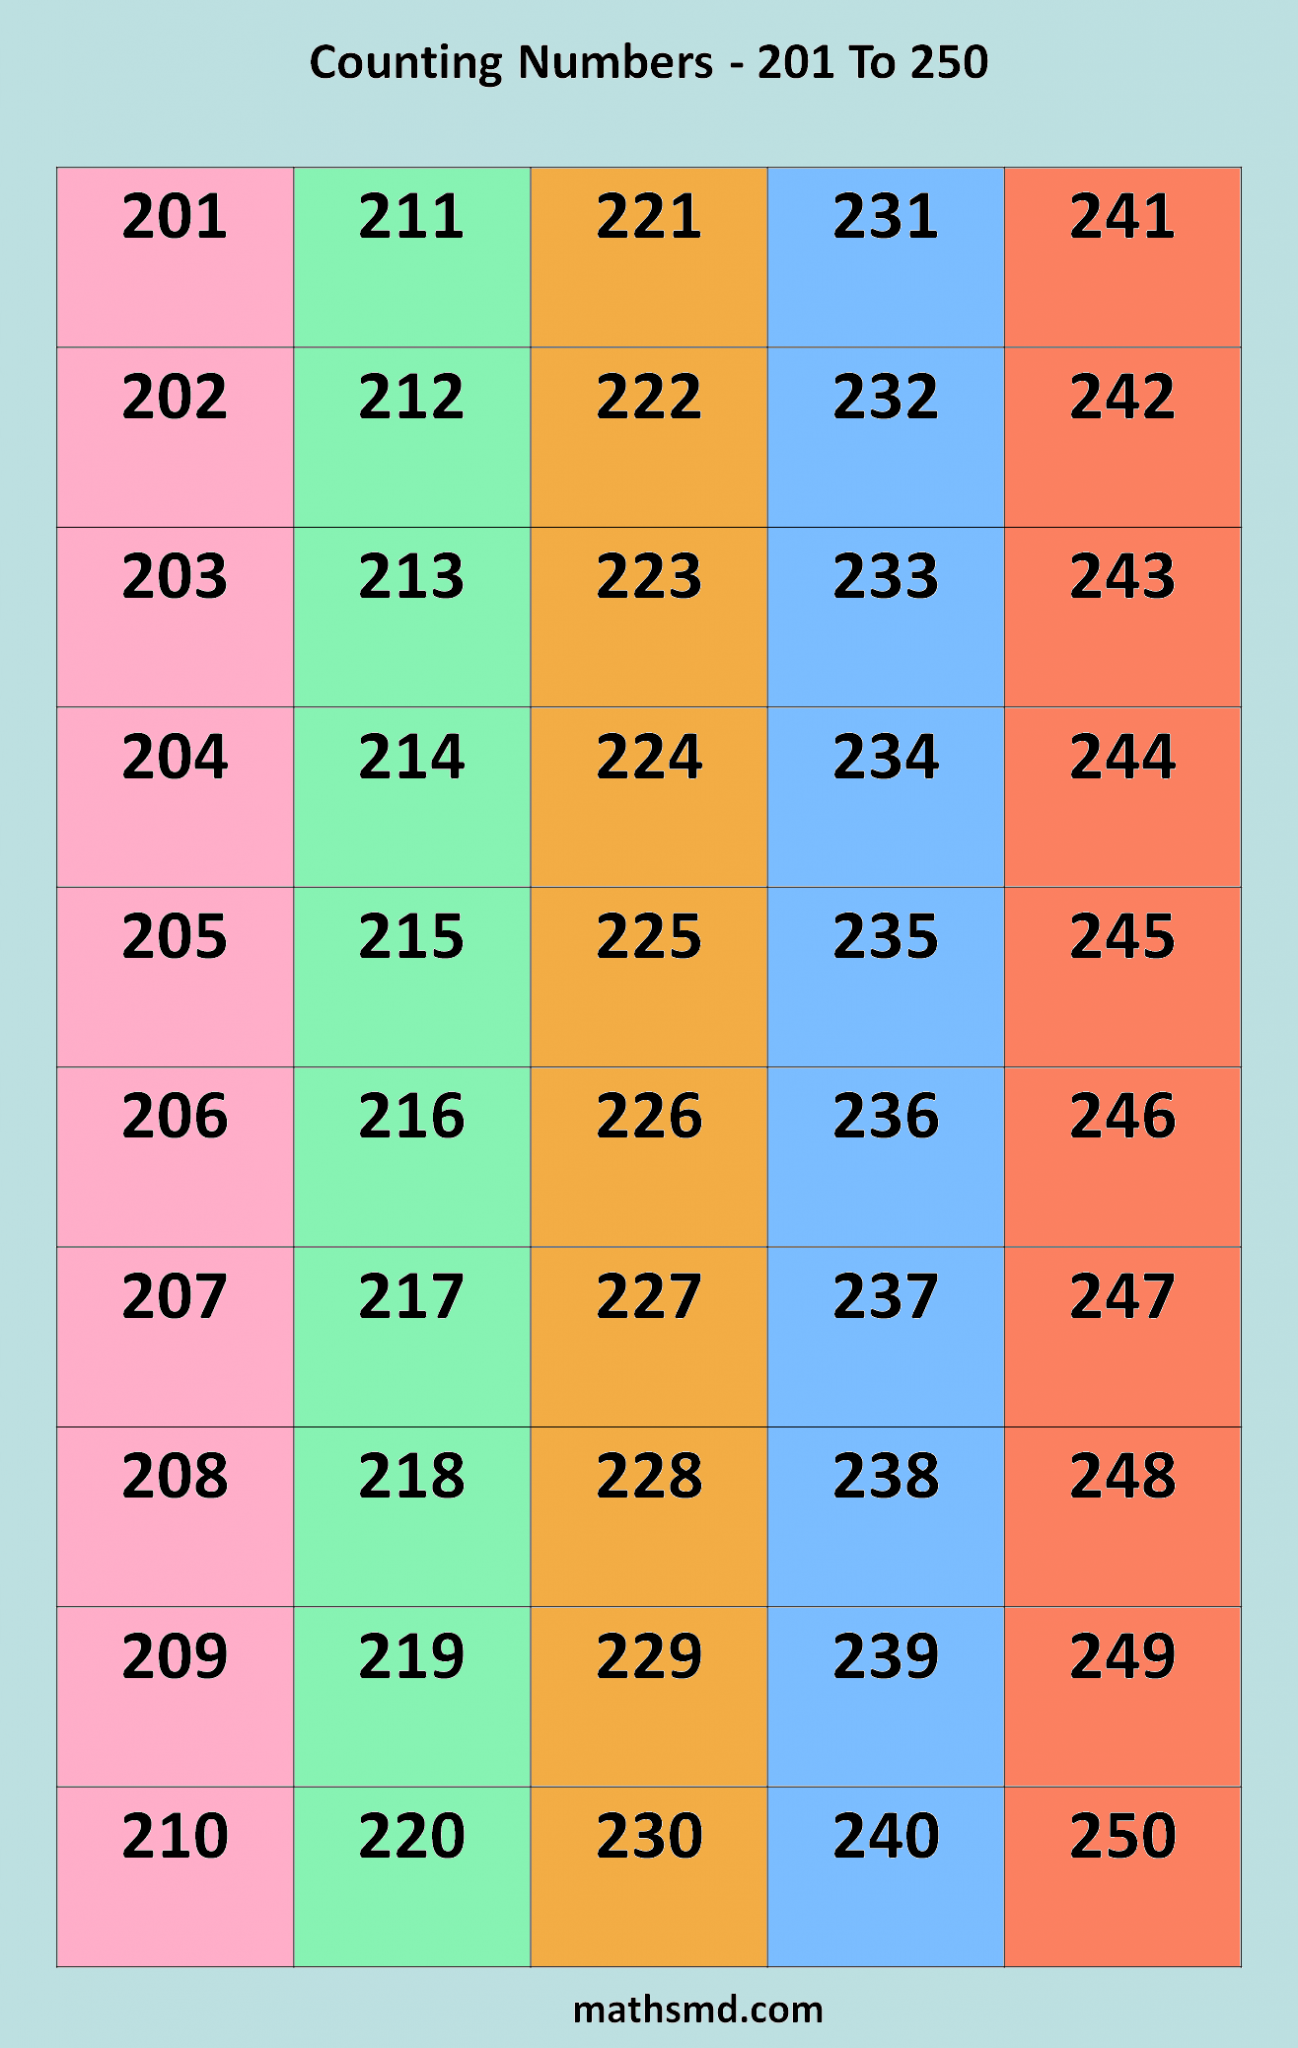 counting-numbers-table-201-to-250-mathsmd